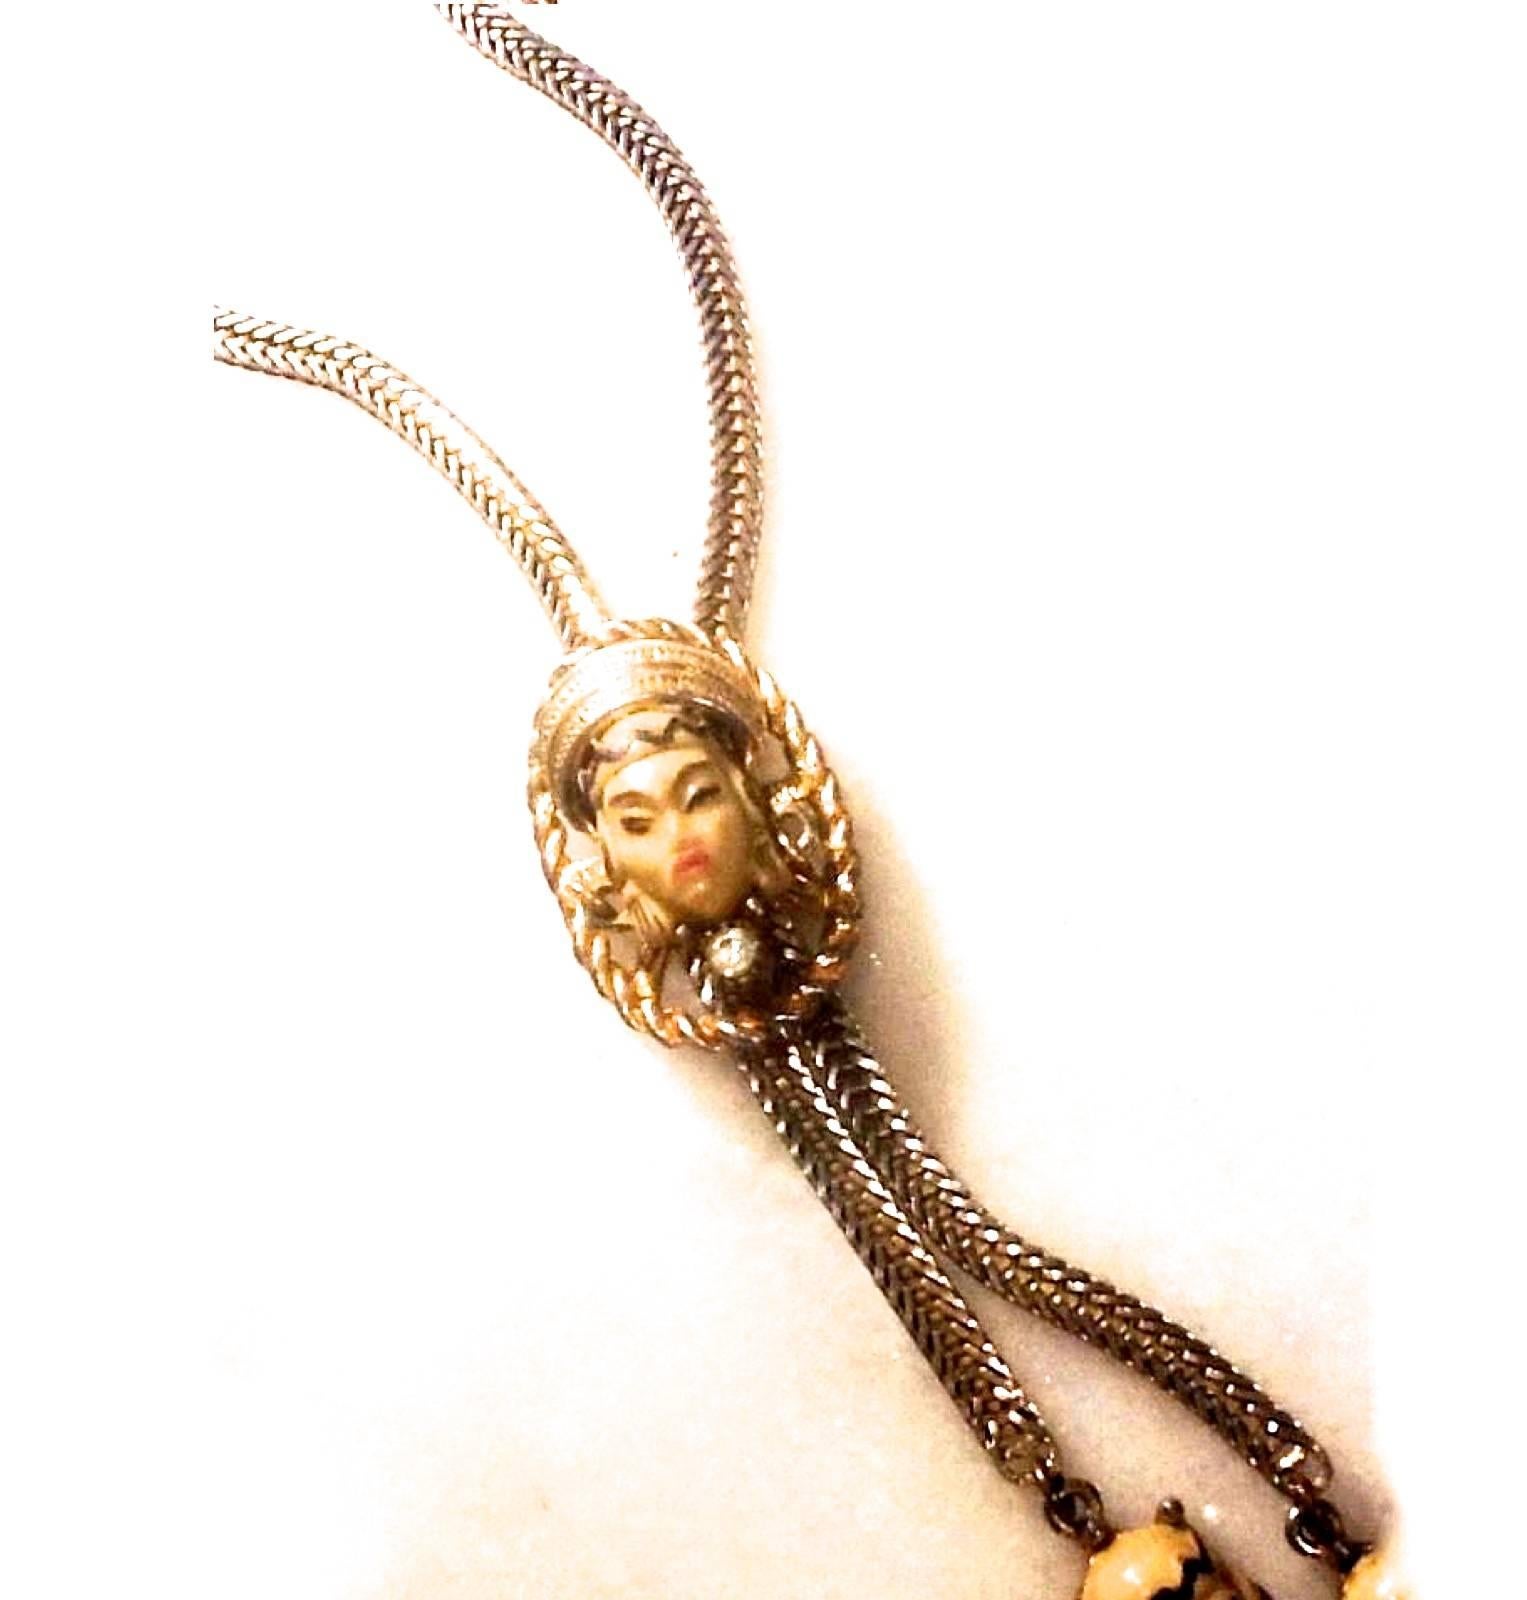 Women's Asian Princess Necklace / Lariat - Gold Tone Chain For Sale